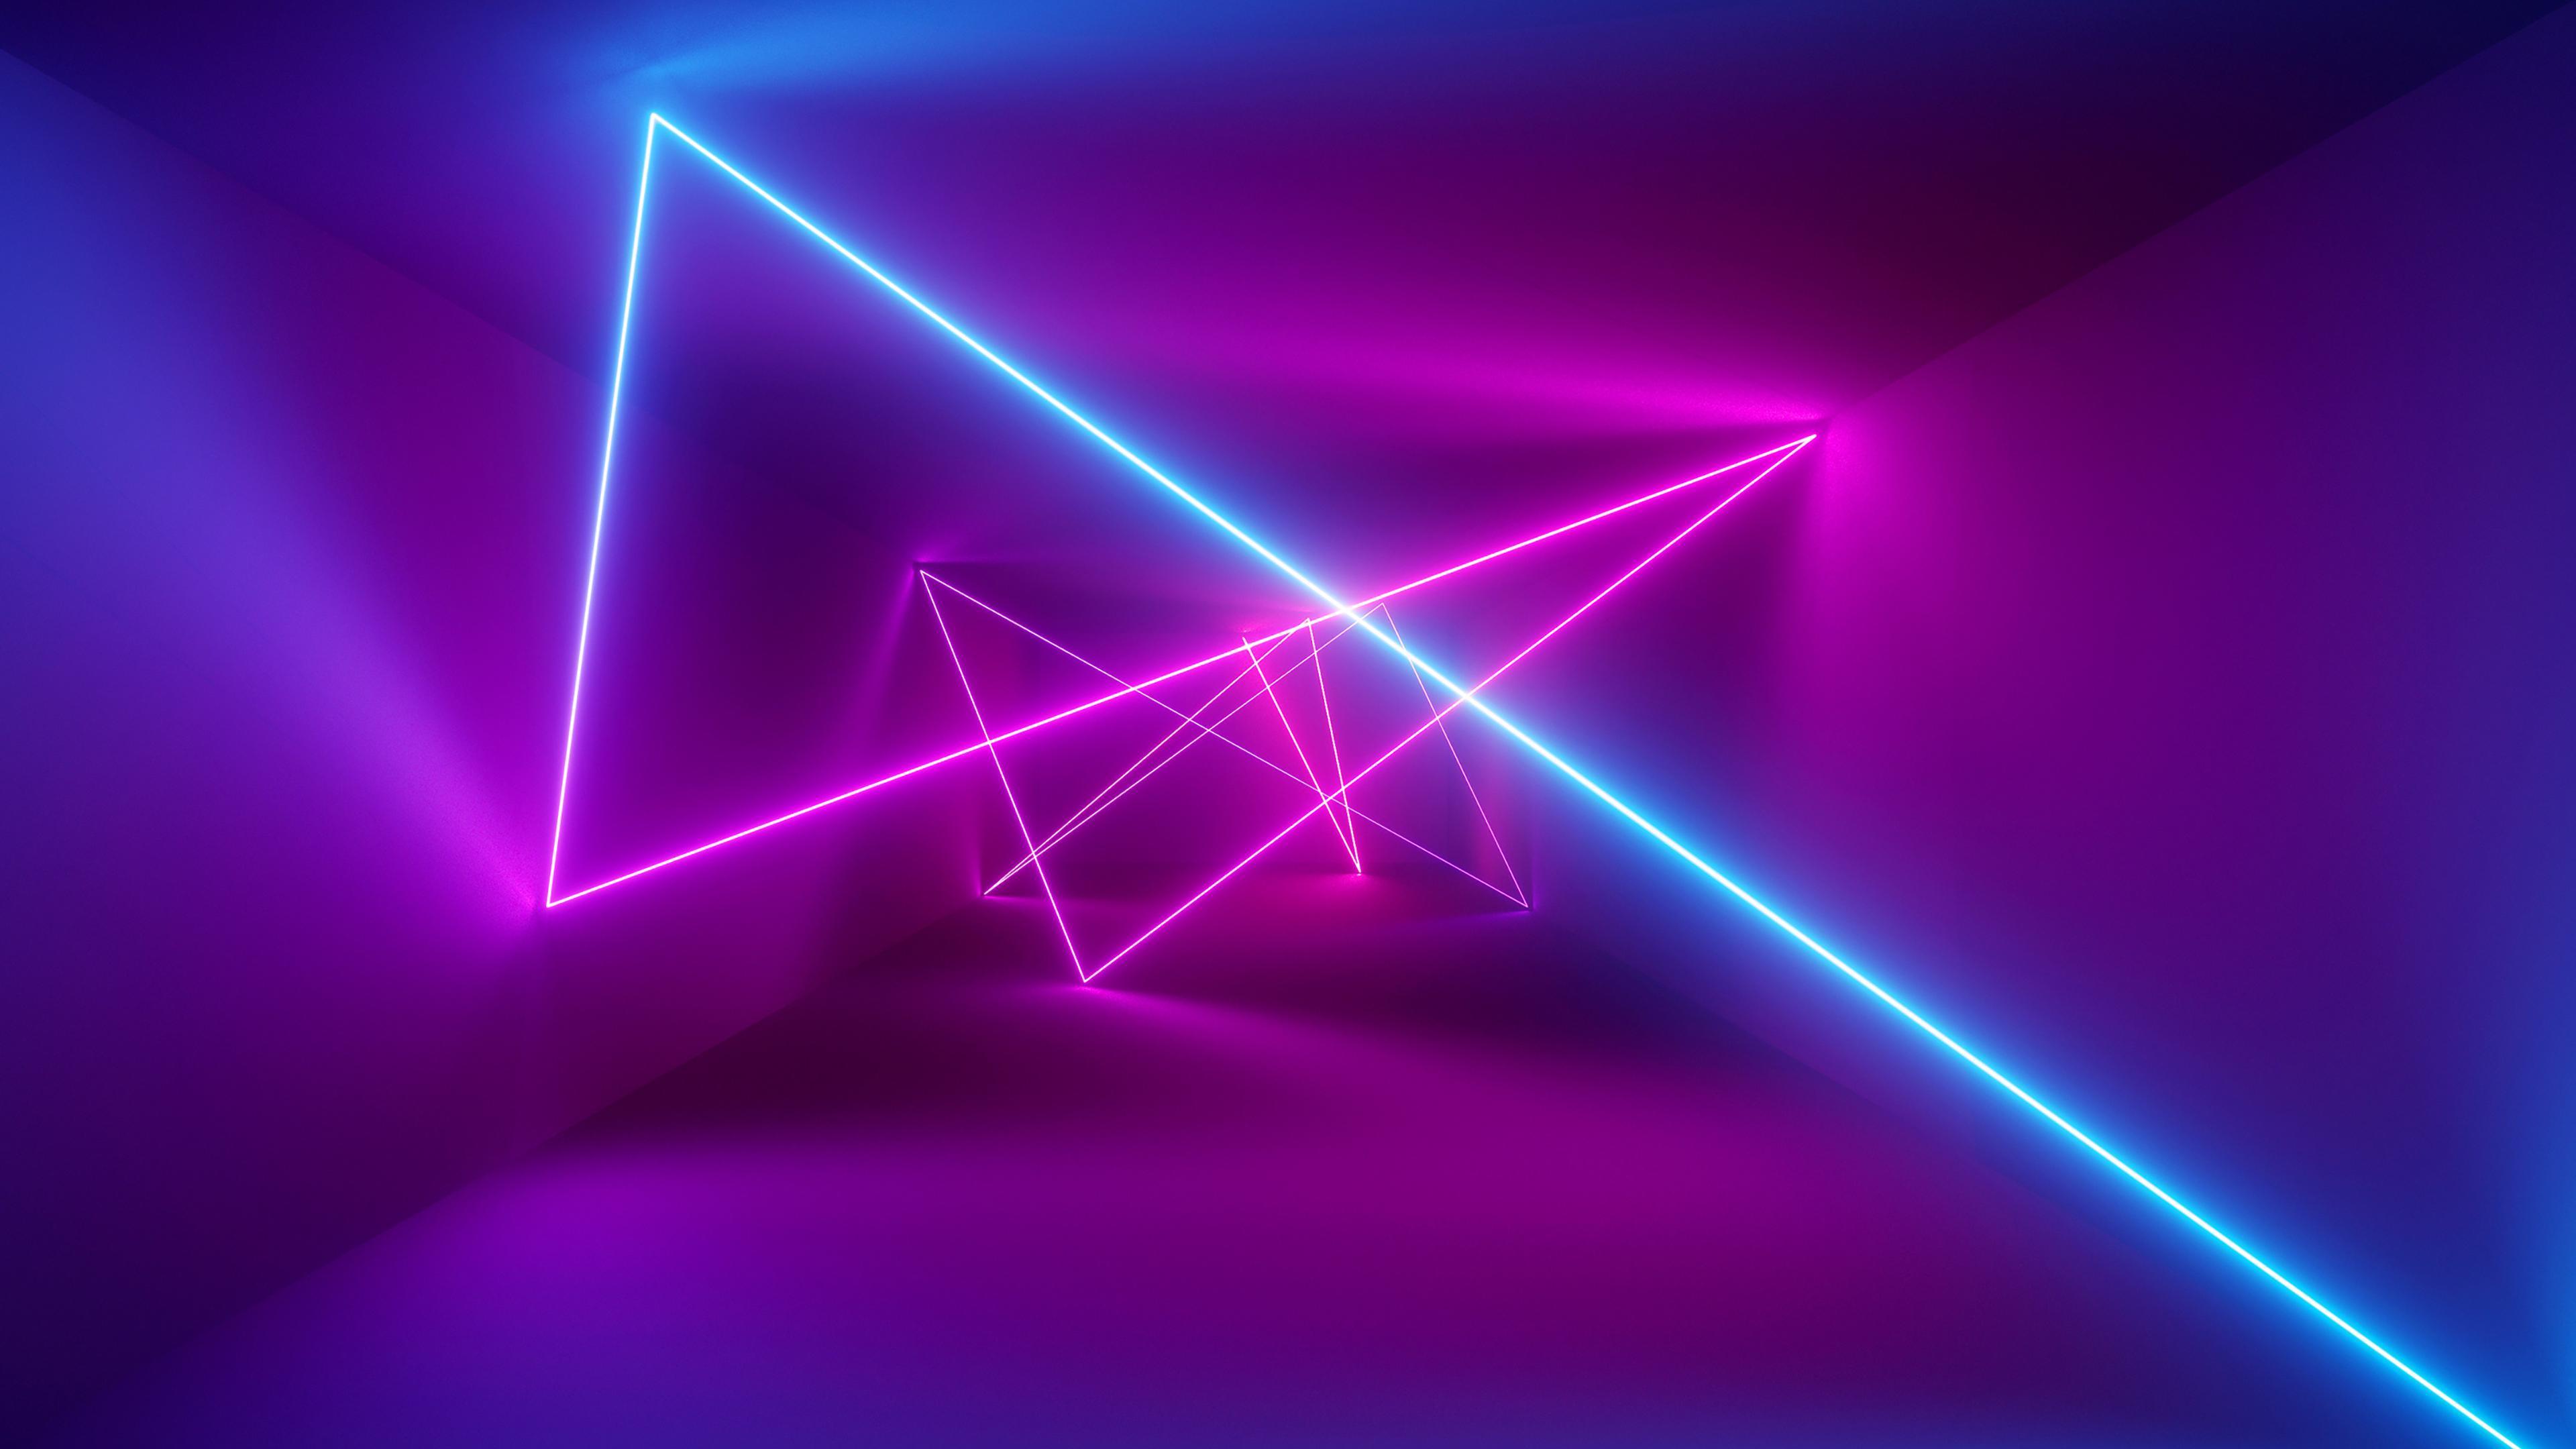 Laser HD Wallpapers and Backgrounds